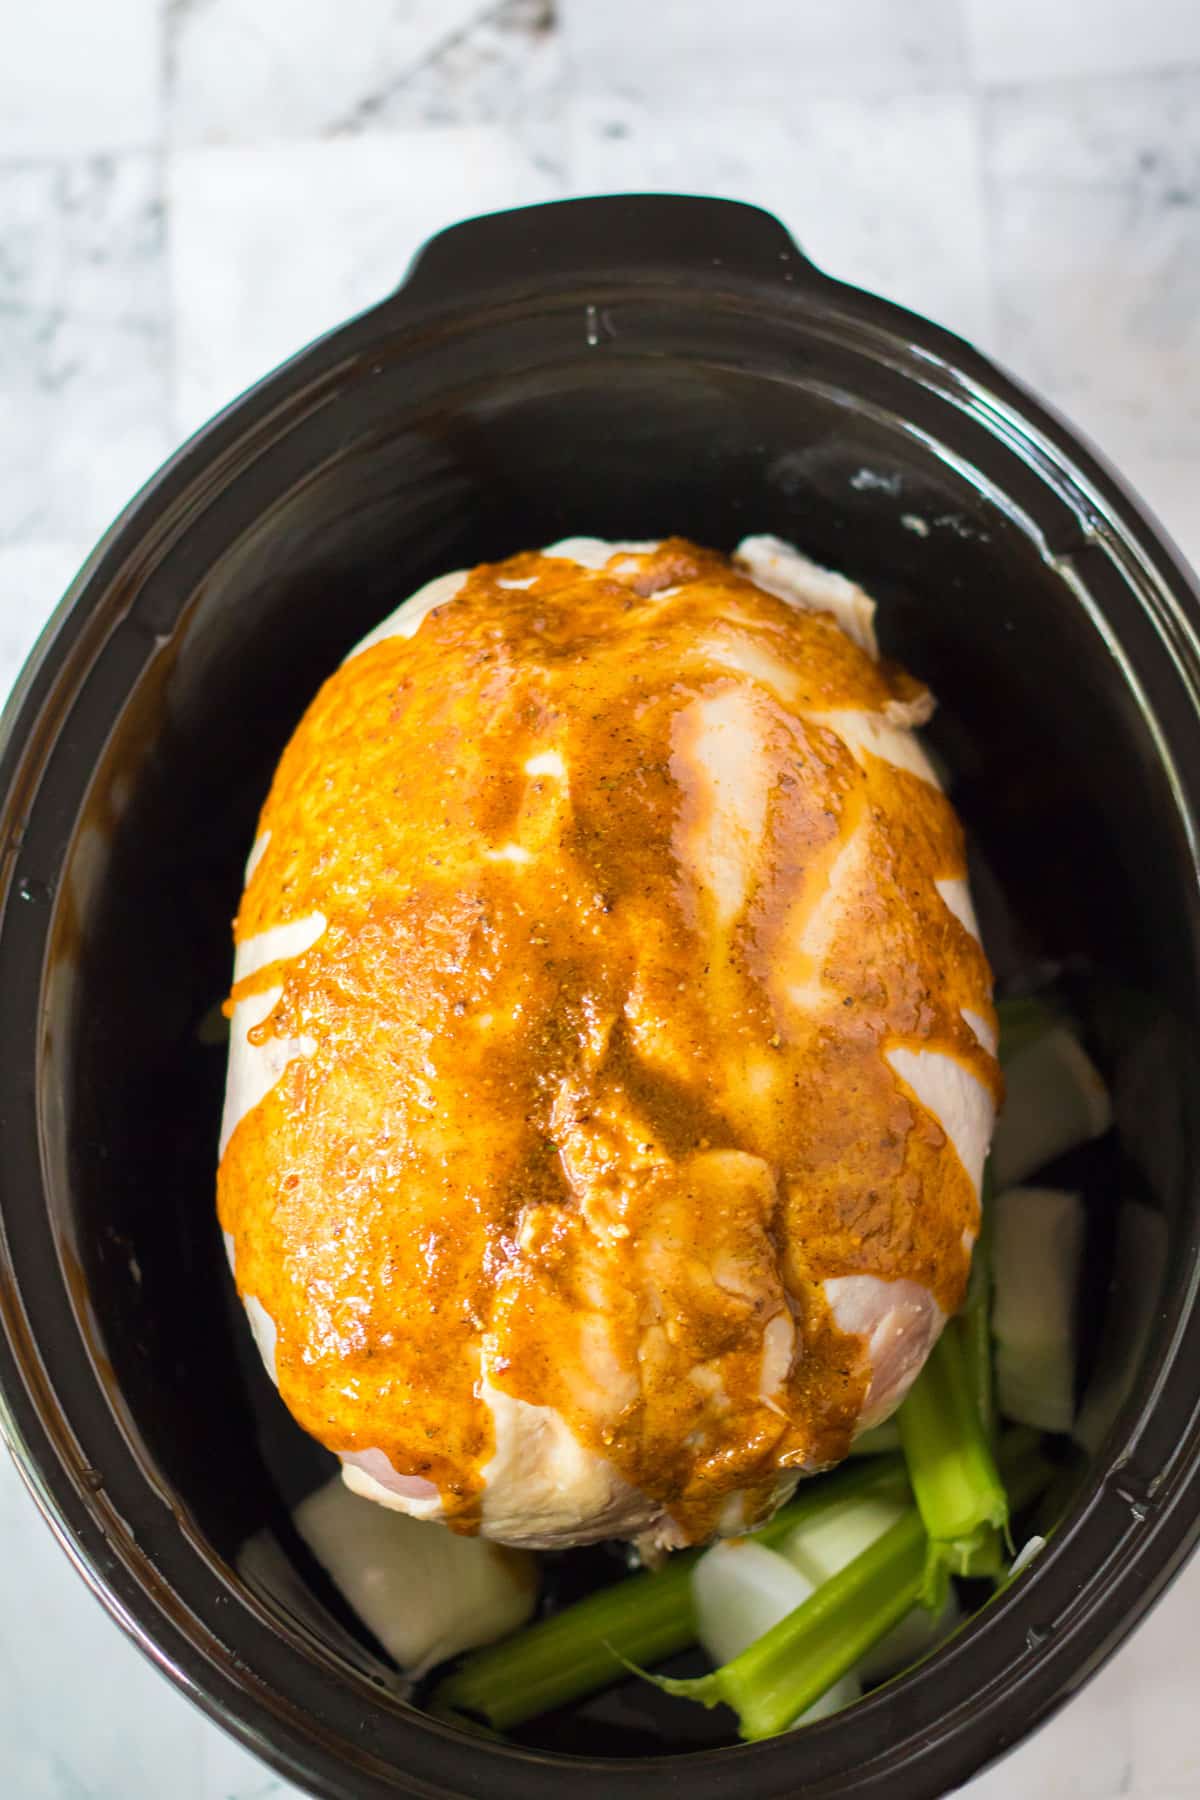 Process of preparing Slow Cooker Turkey Breast with Vegetables